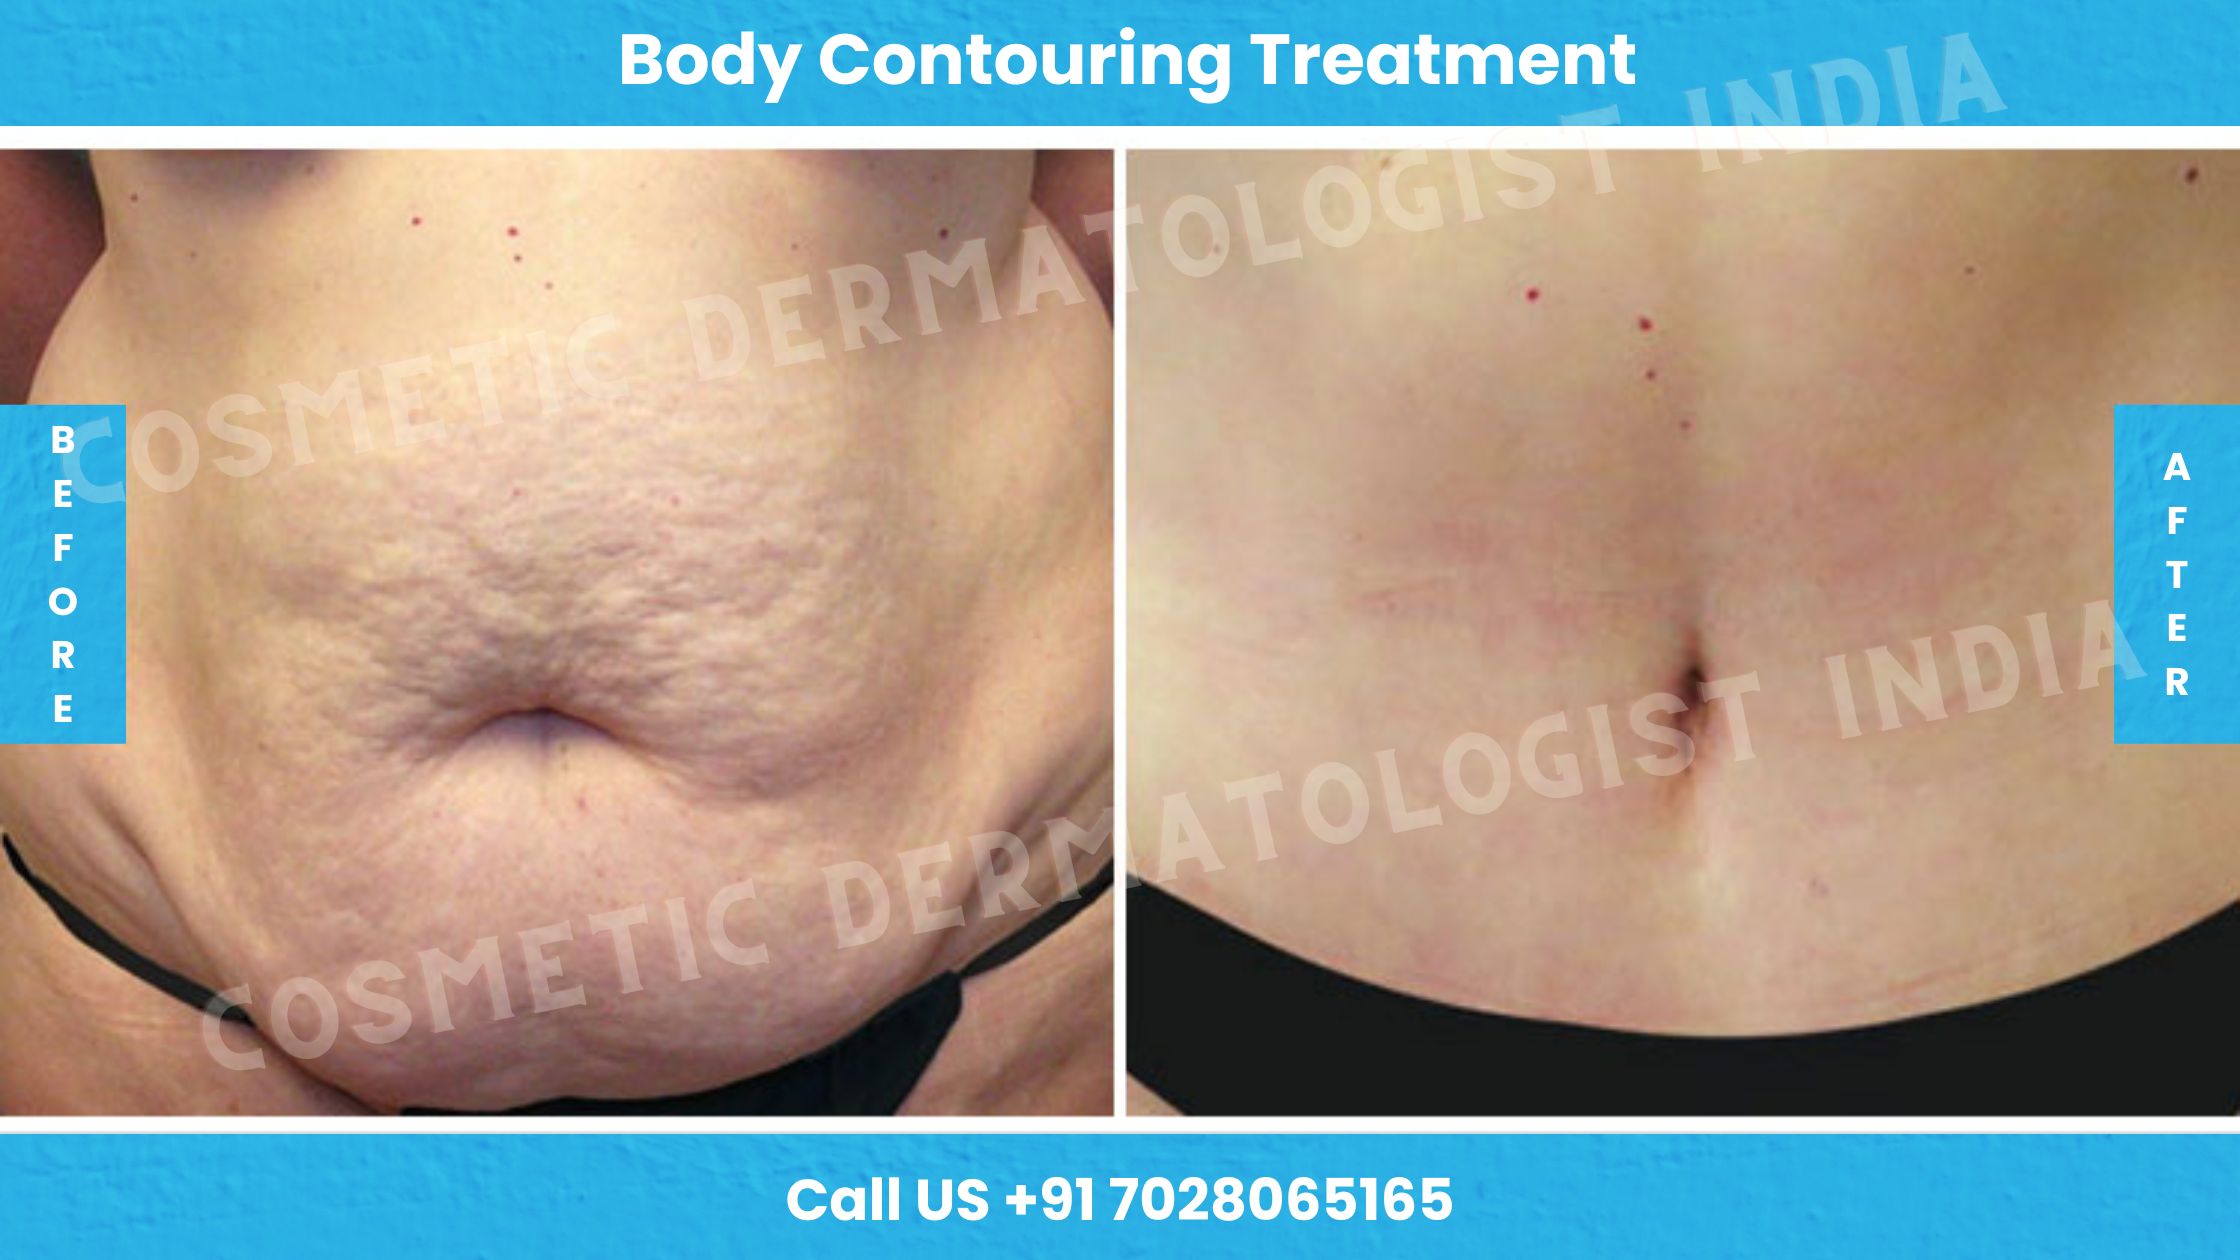 Before and After Images of Body Contouring Treatment